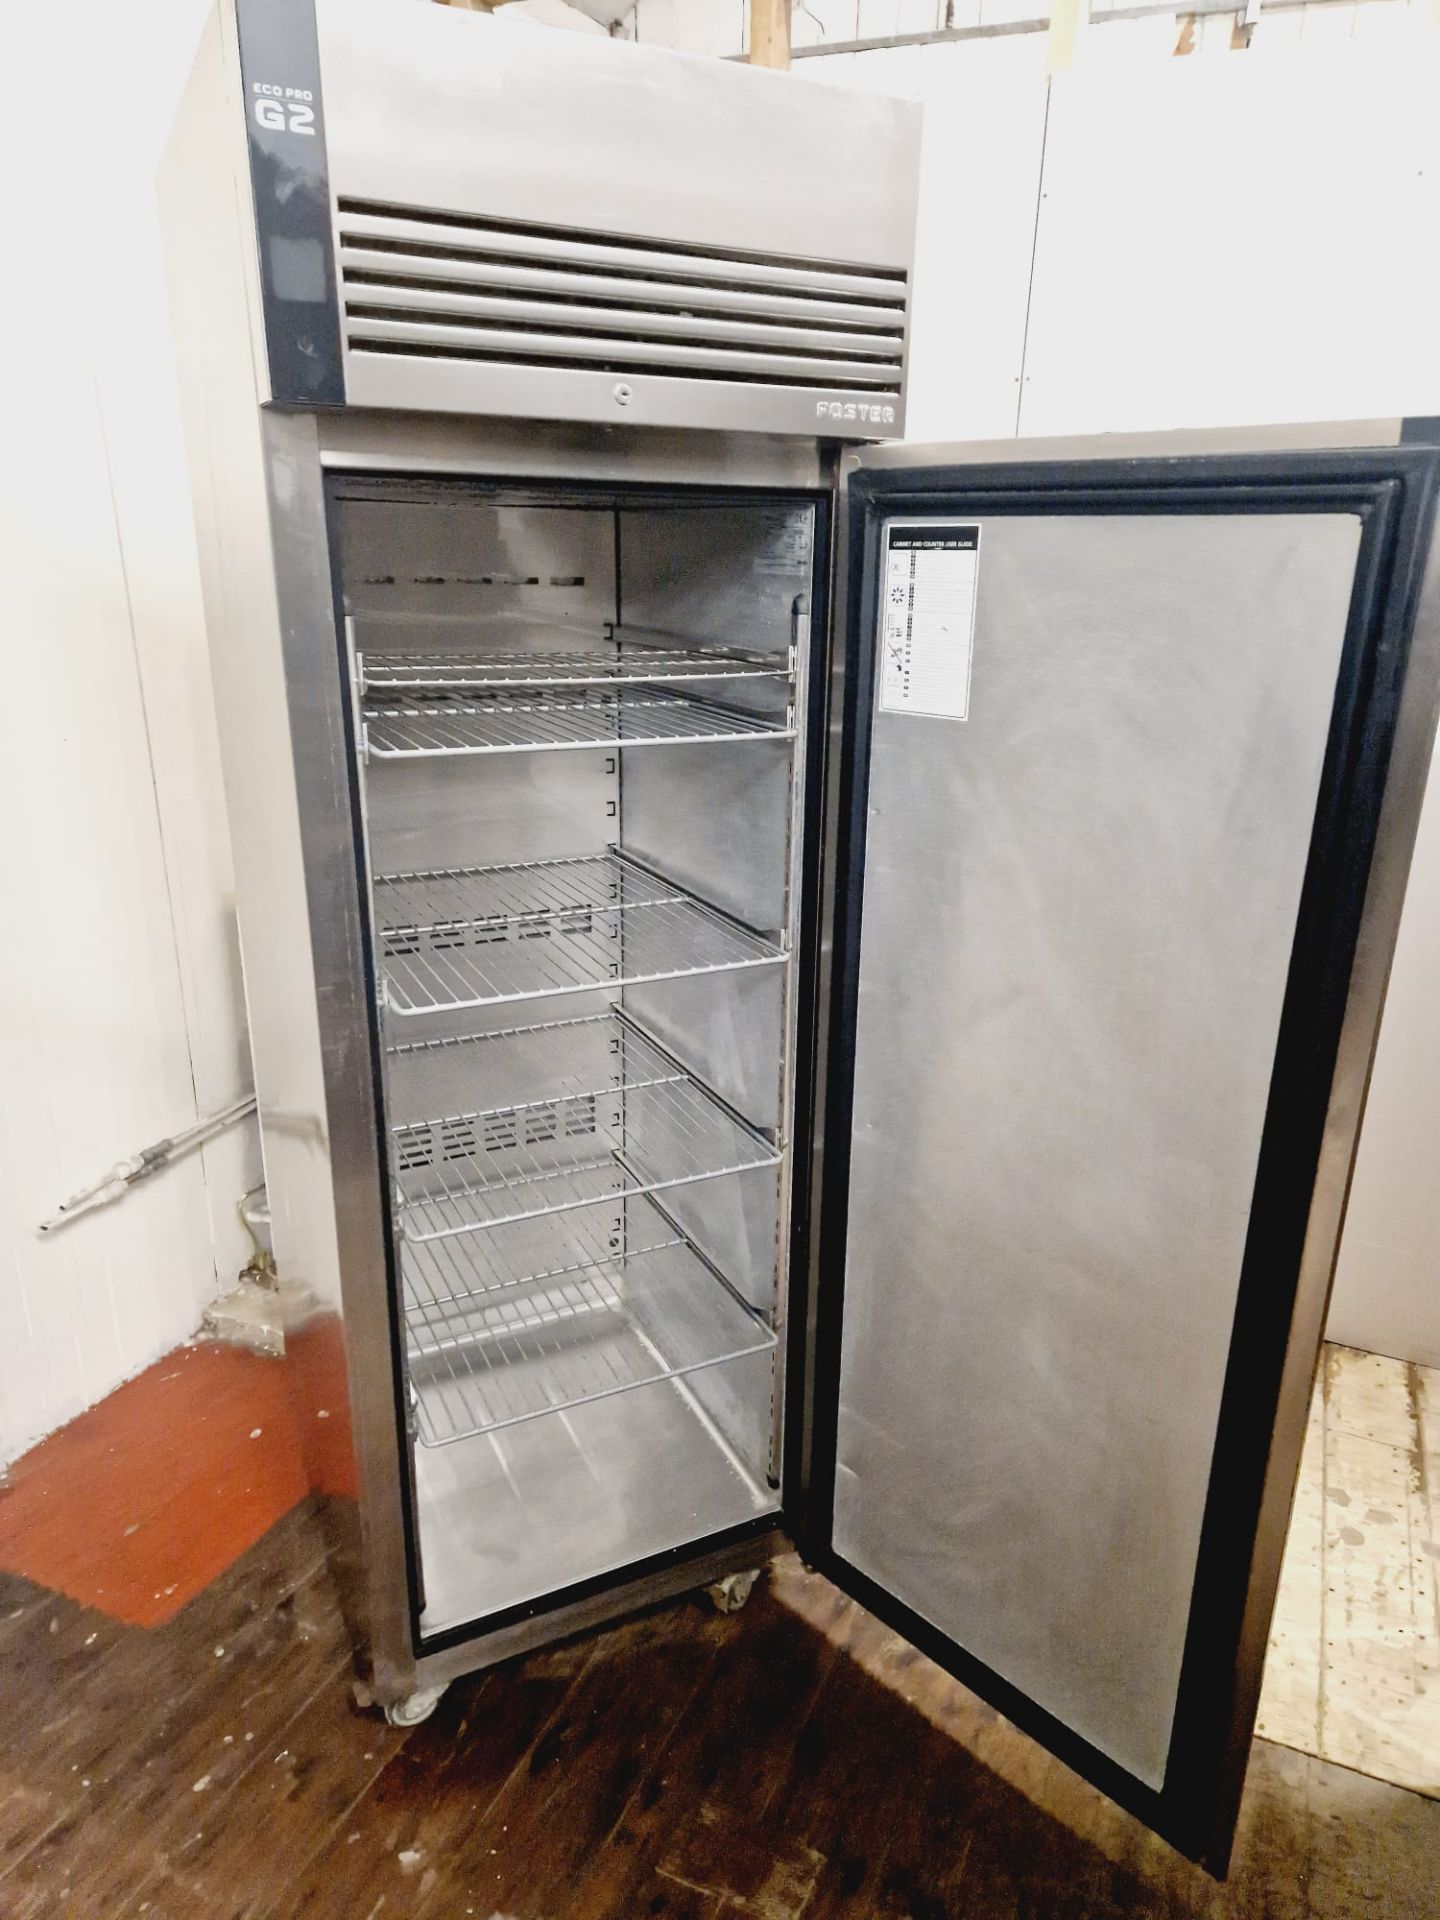 FOSTER G2 UPRIGHT FRIDGE +1 +4 - 600 LITRE - STAINLESS STEEL - FULLY WORKING AND SERVICED - Image 2 of 3